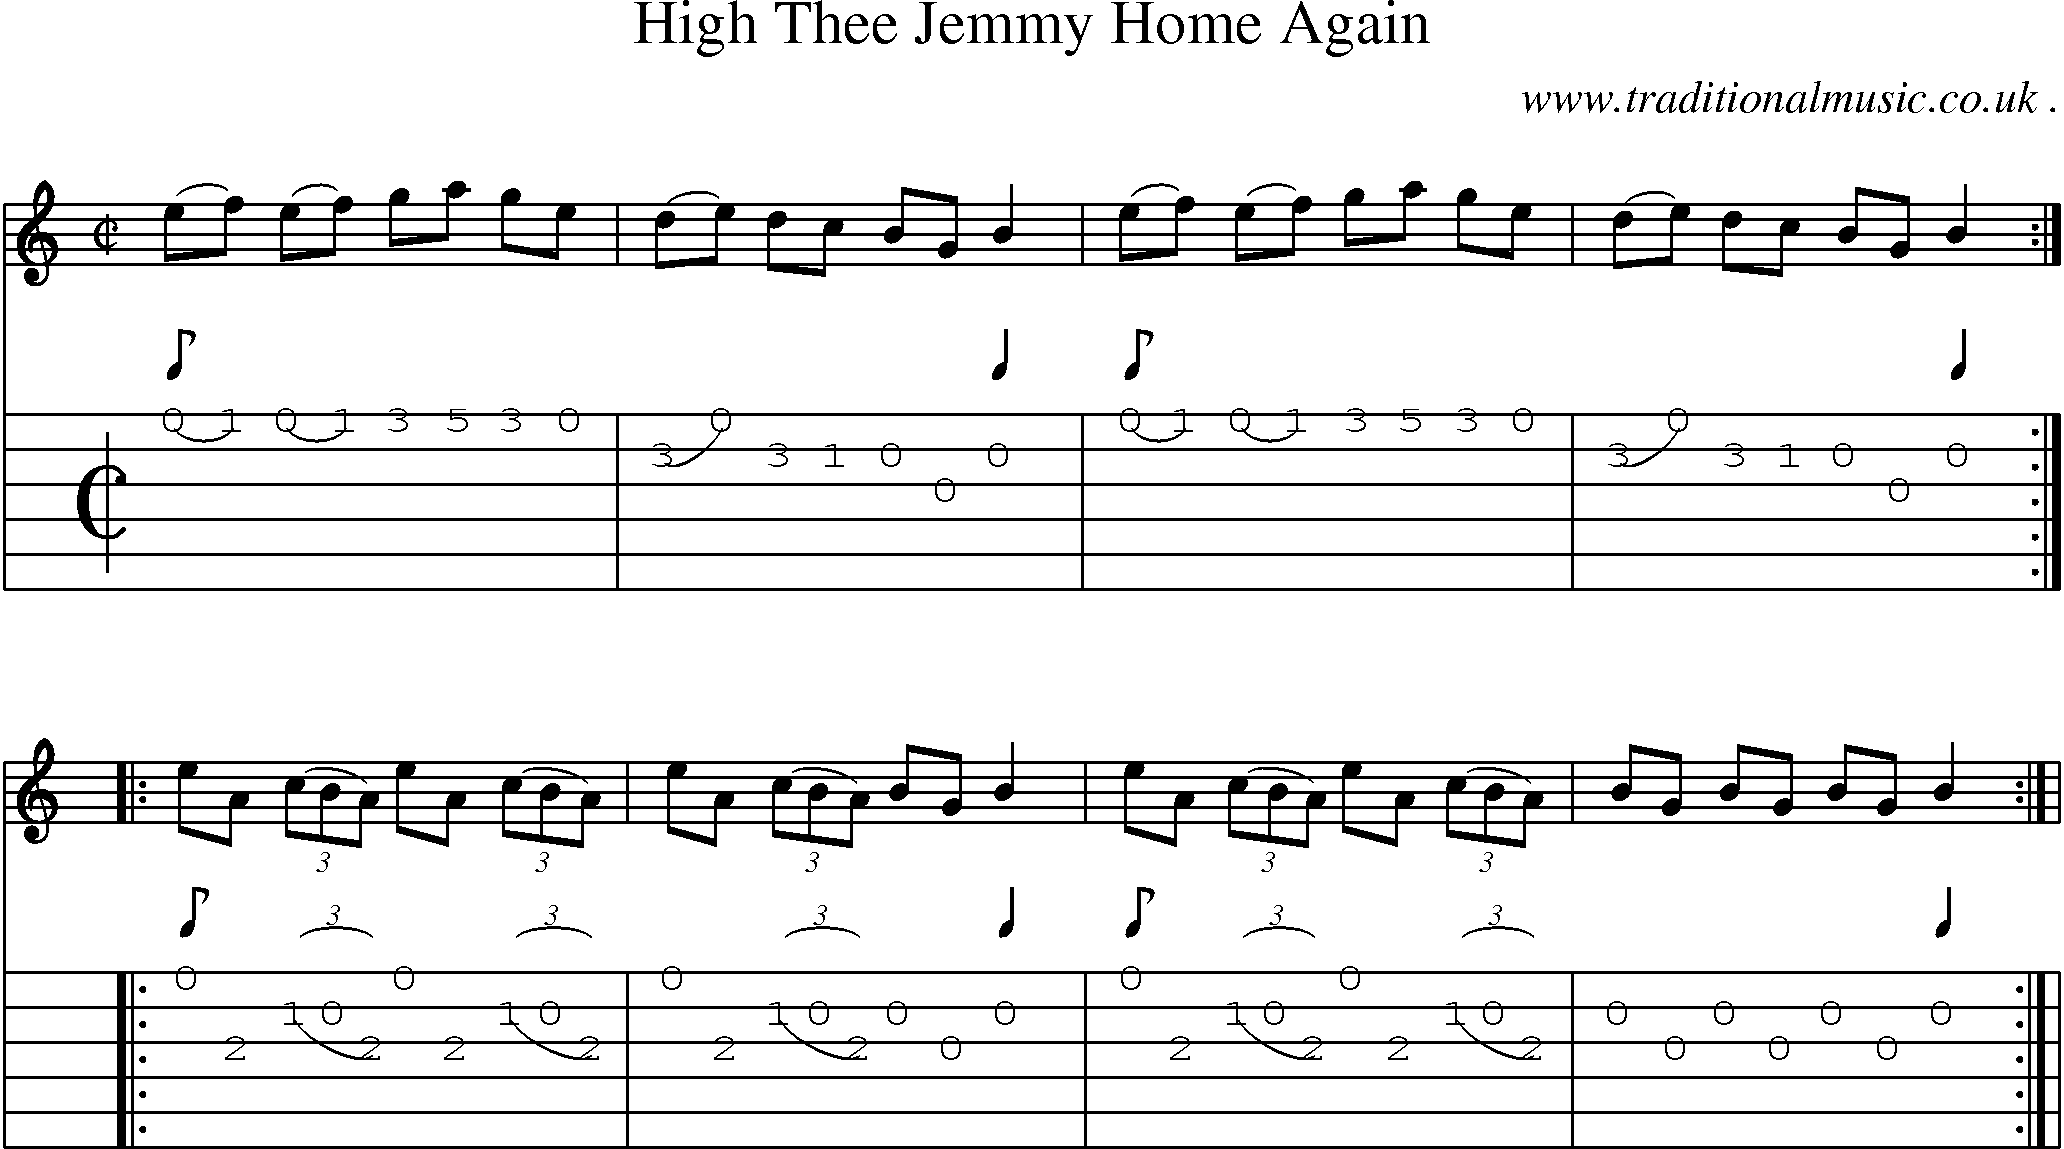 Sheet-Music and Guitar Tabs for High Thee Jemmy Home Again